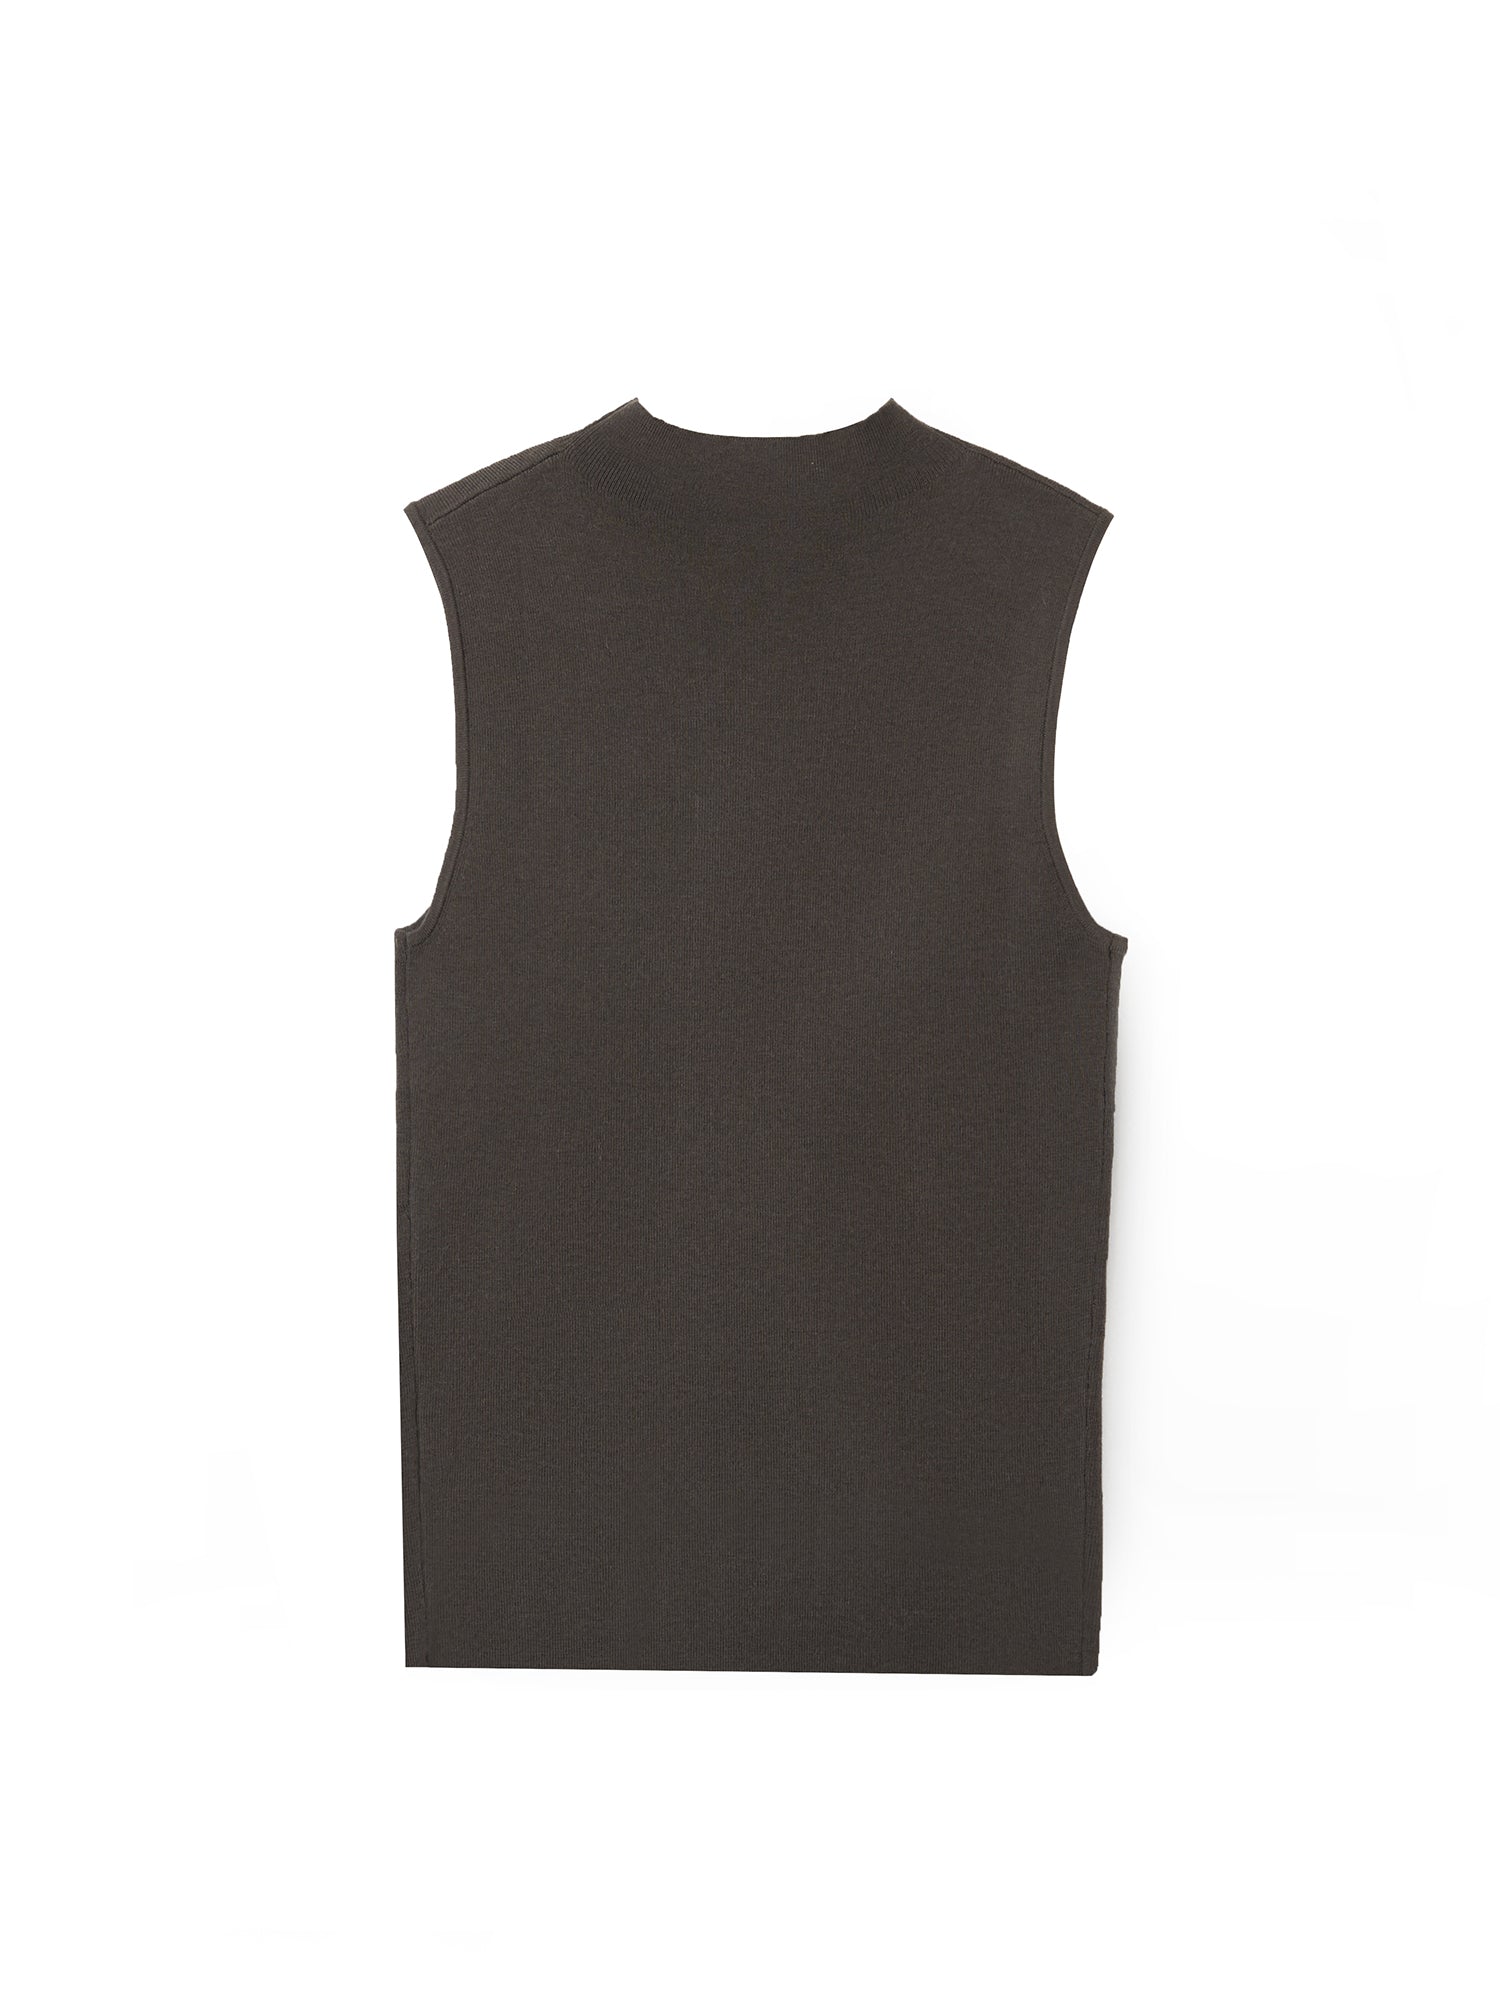 Cashmere like Thermal Mock Neck Tank-Top